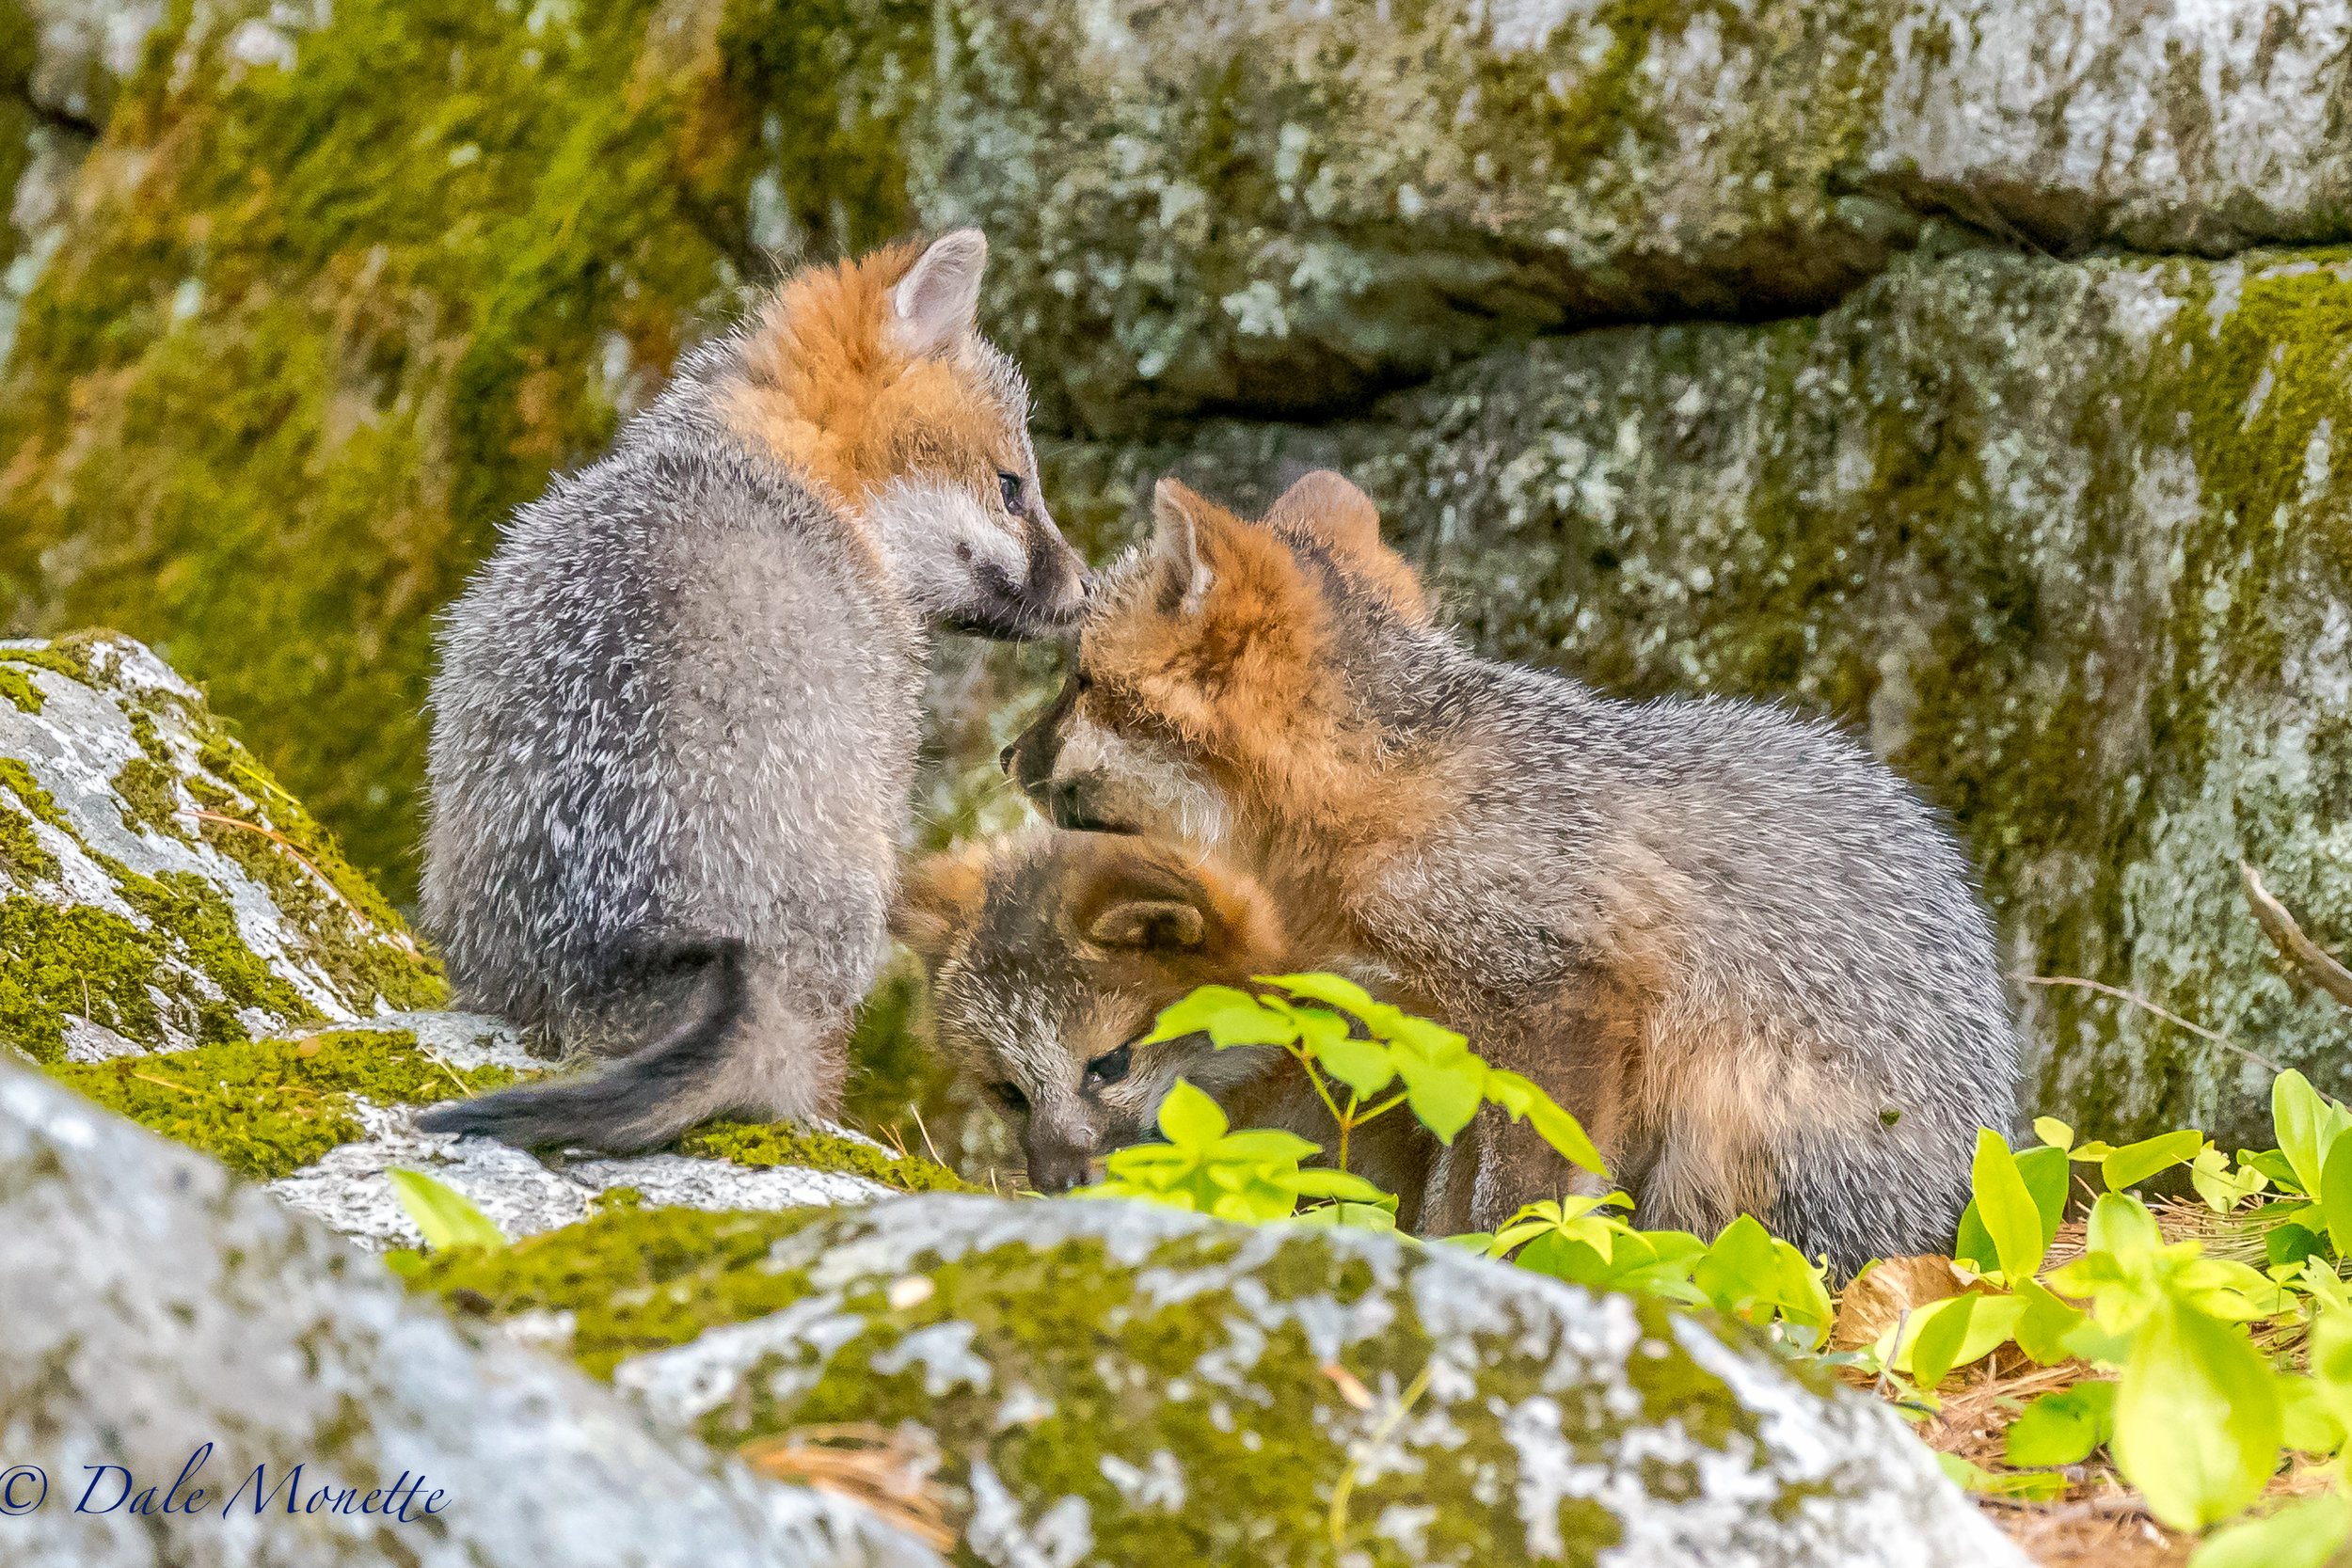   A summit meeting ! &nbsp;These 3 gray fox kits belong to the female gray fox on the next page here. &nbsp;They are about 3 months old and ready to take on the world. 6/2/17  